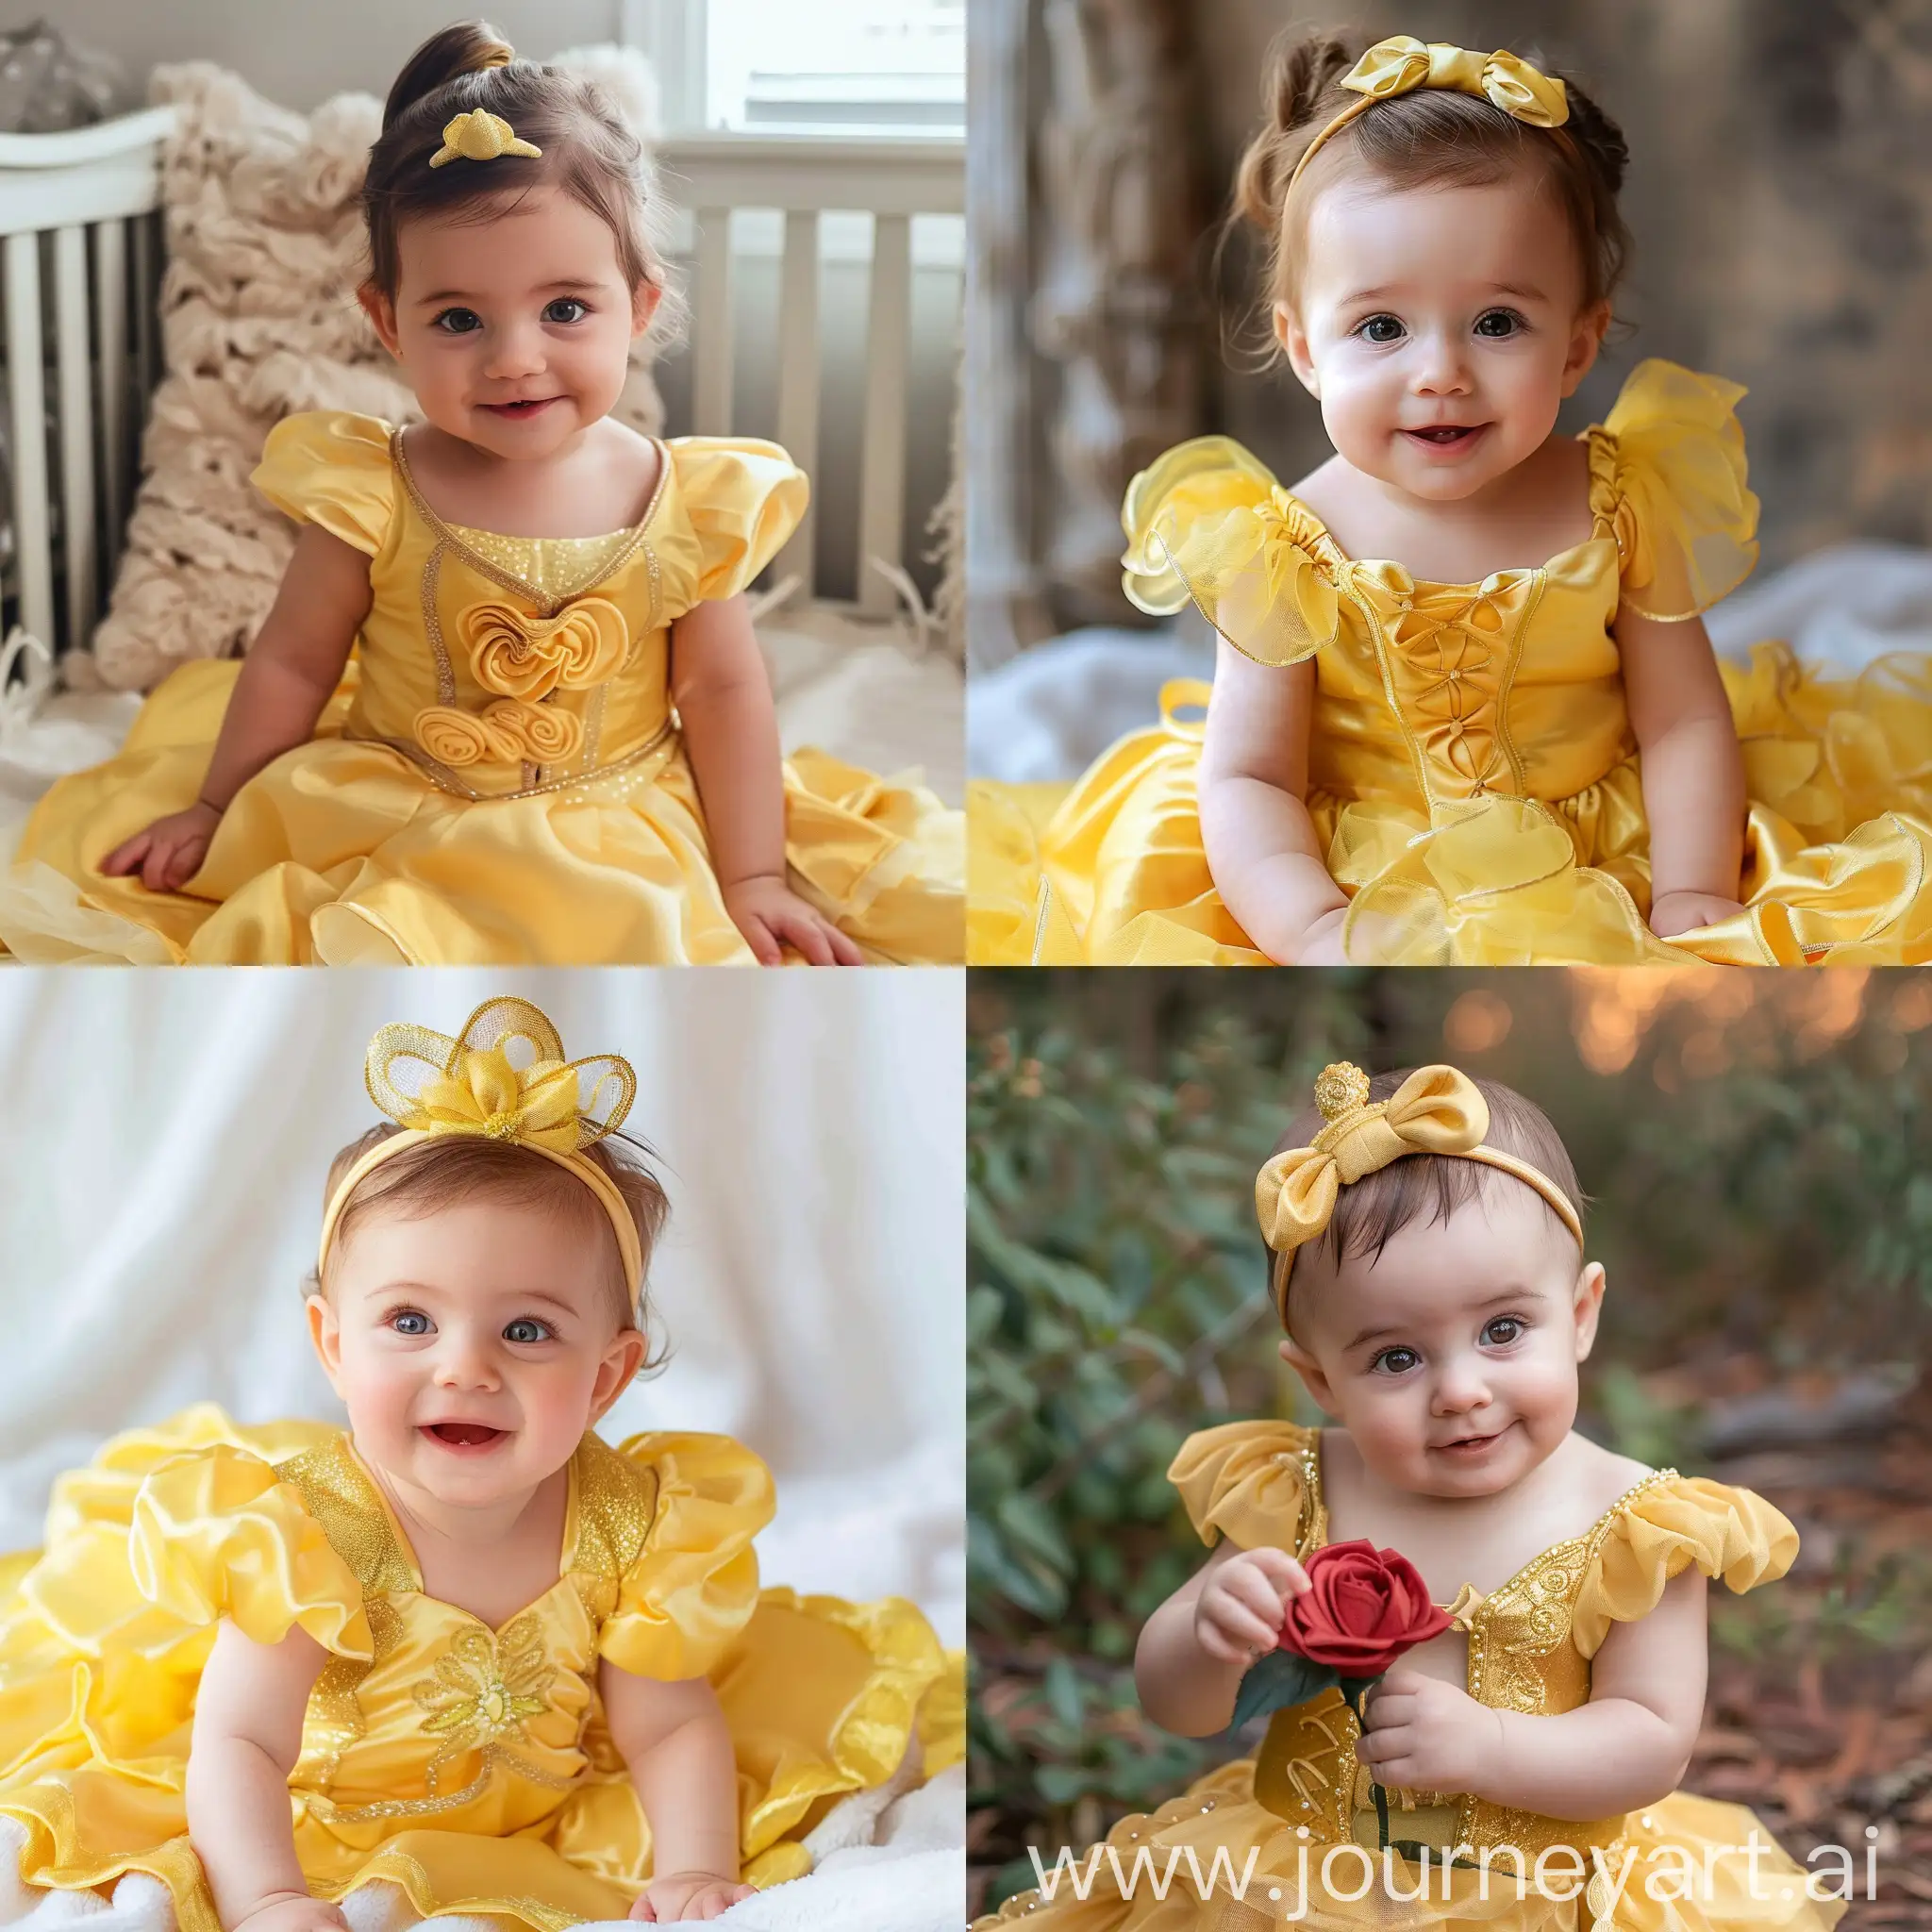 Adorable-Baby-Dressed-as-Princess-Belle